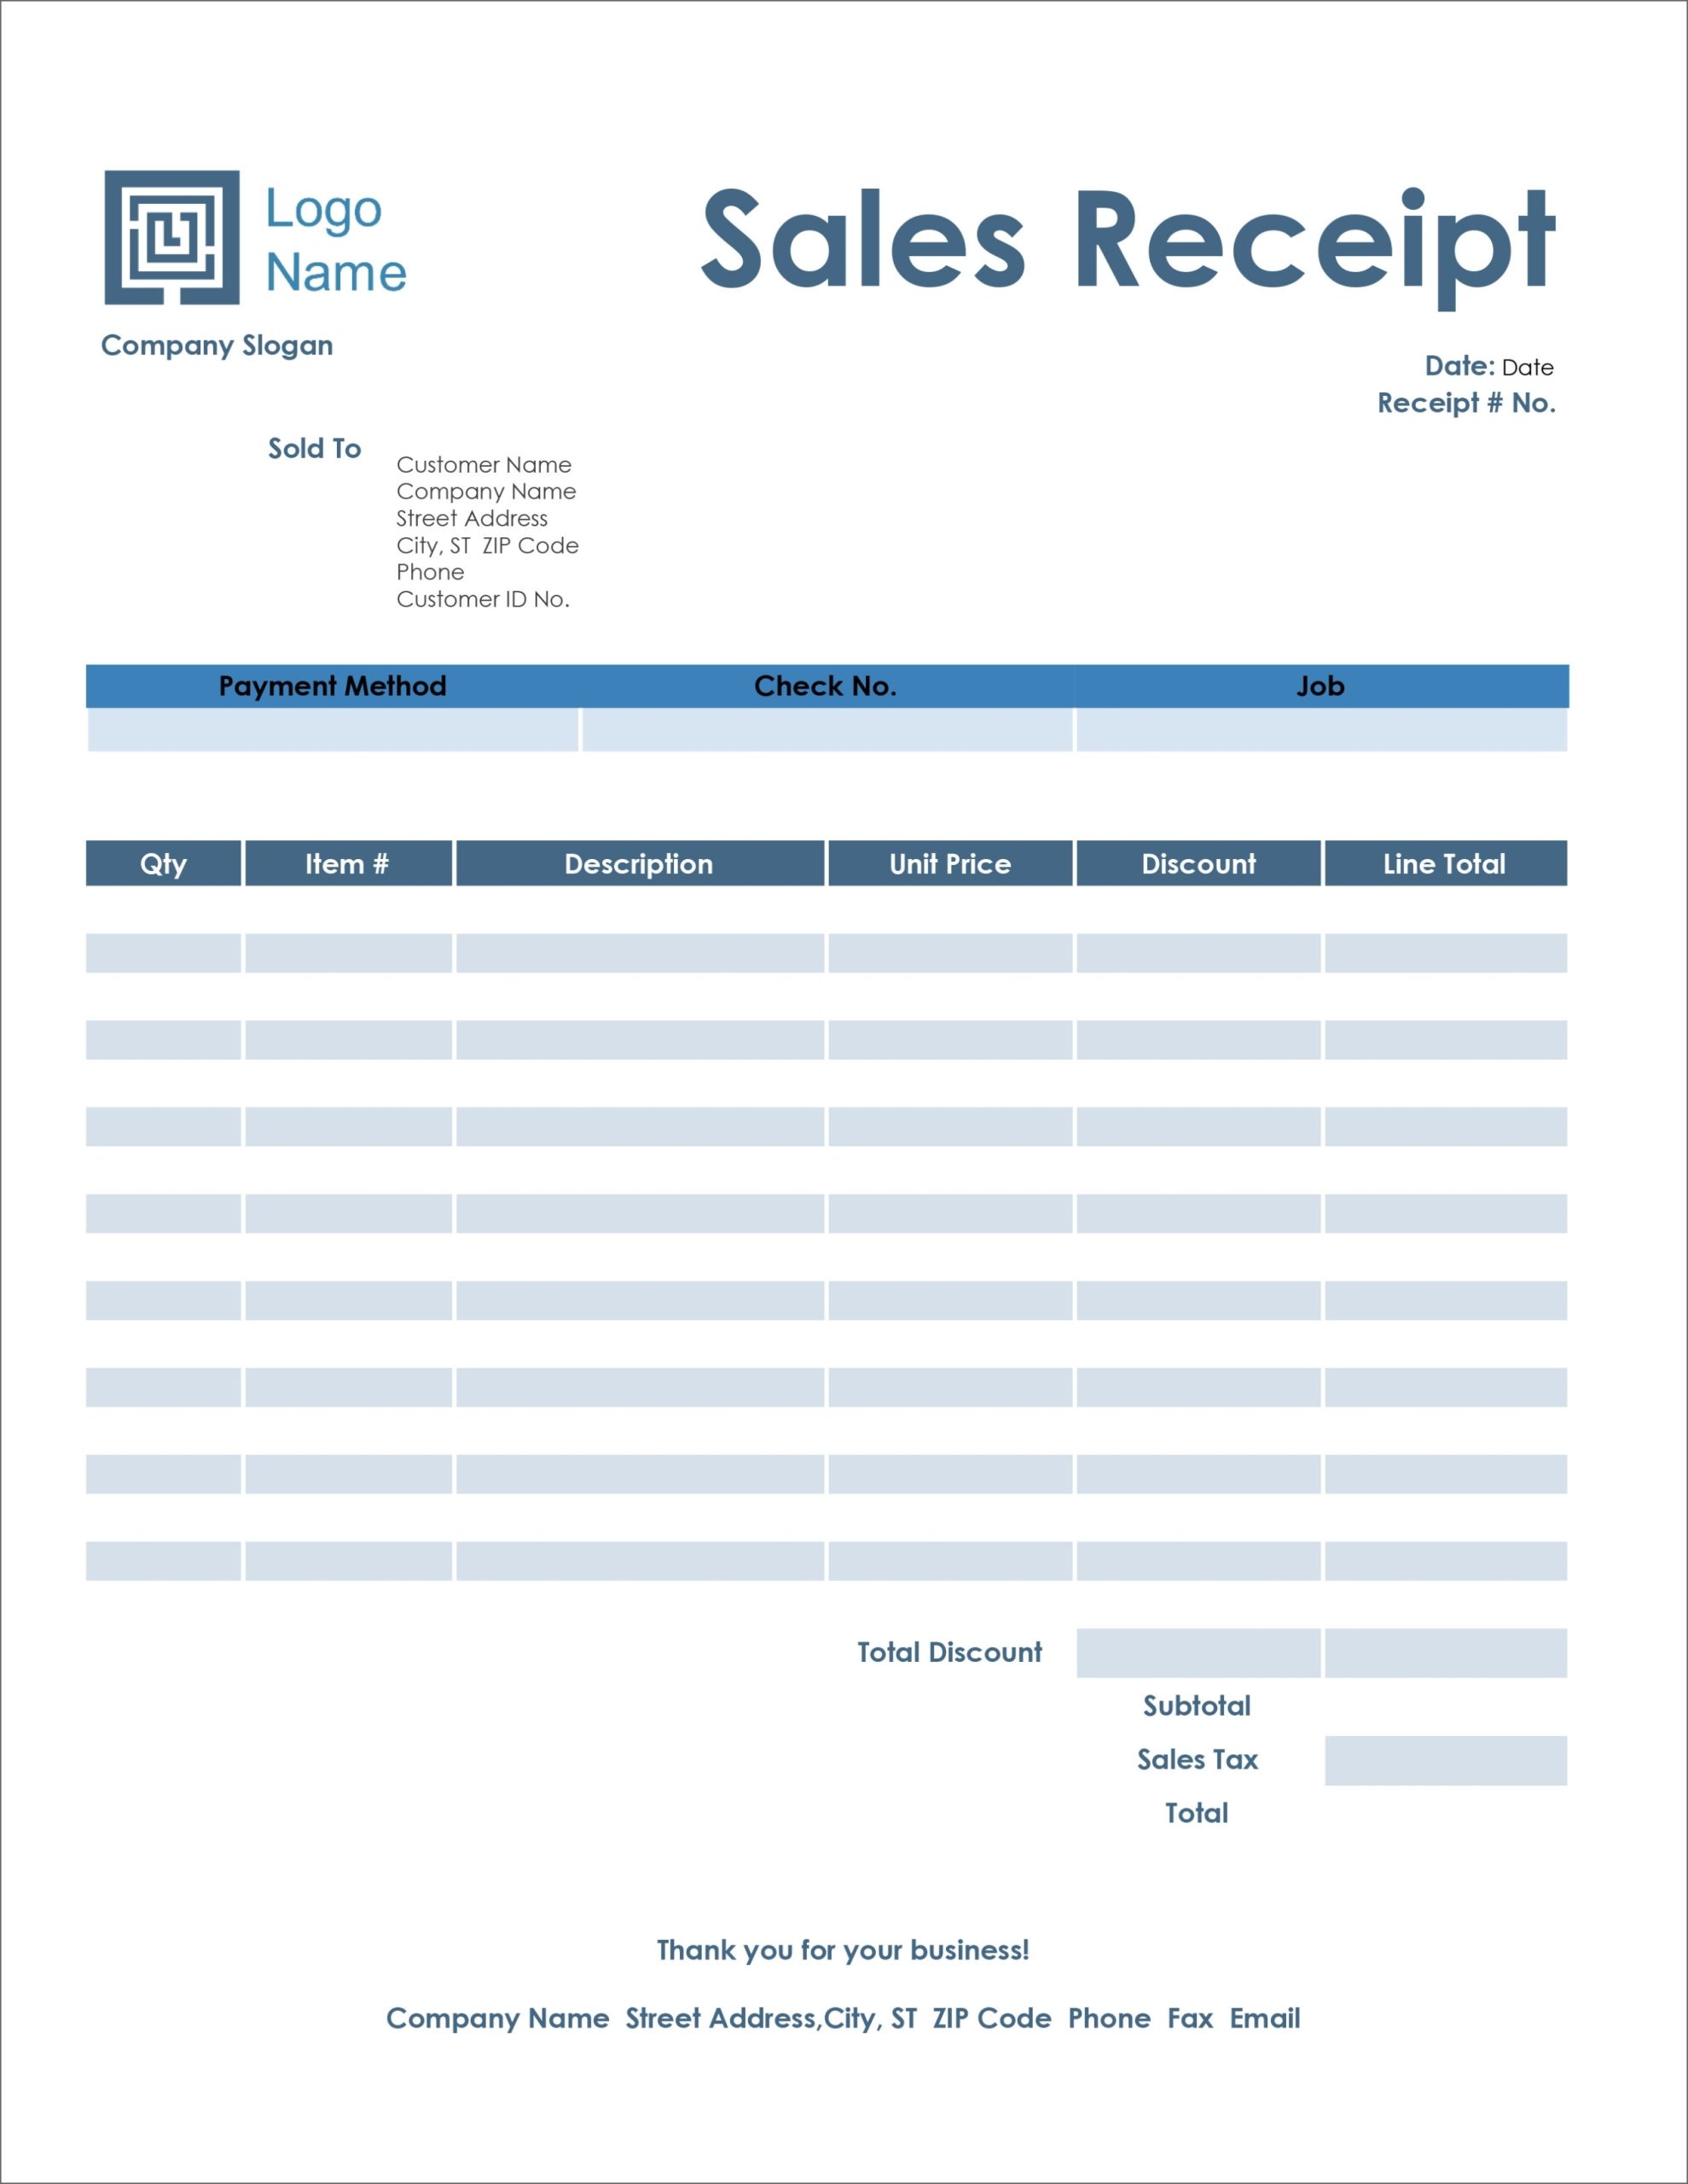 Fake Credit Card Receipt Template for Credit Card Receipt Template